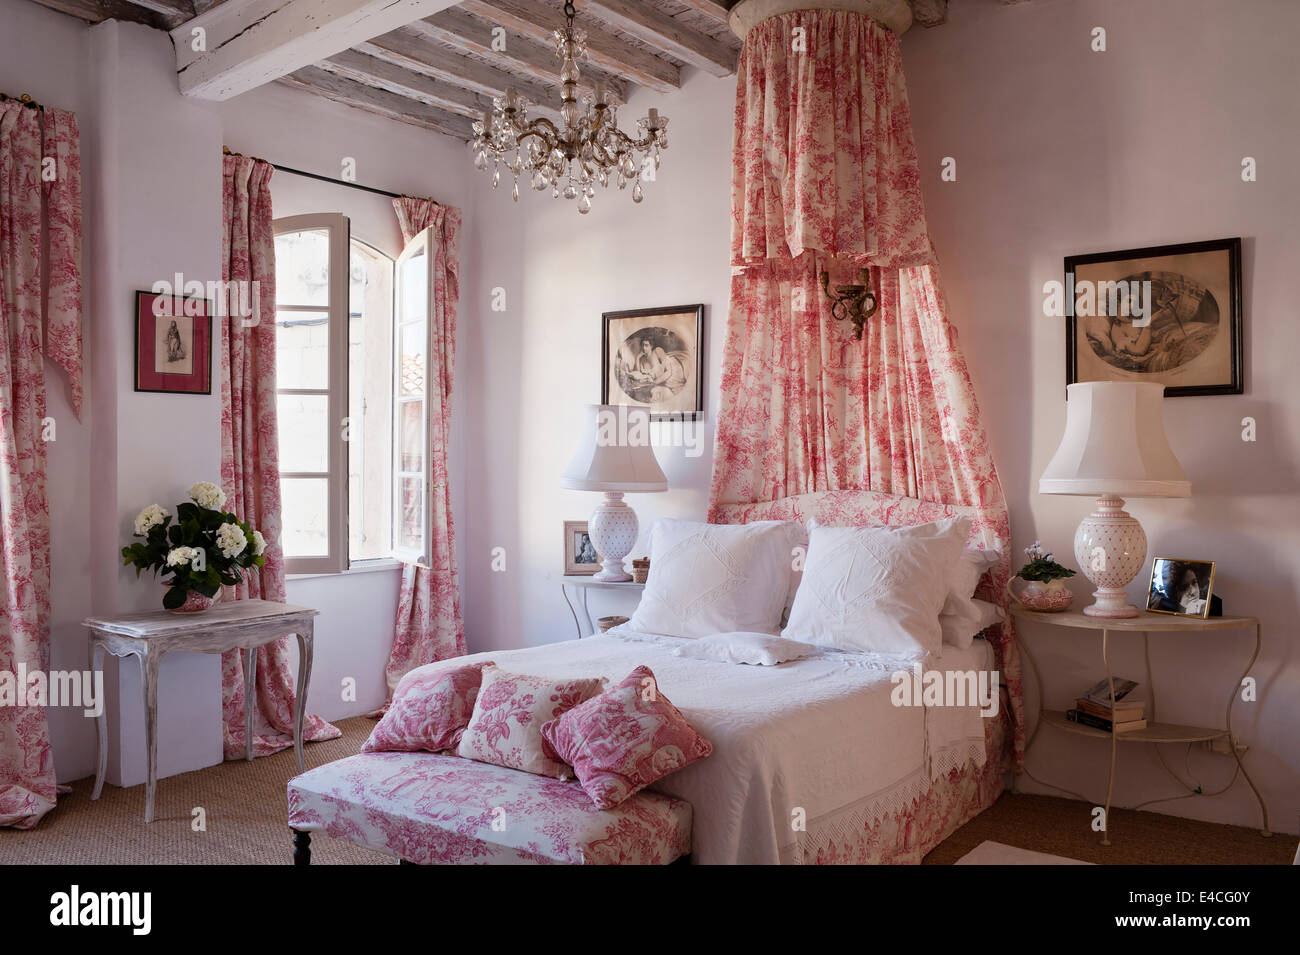 Pink and white toile de jouy fabric on cushions, curtain and bed coronet canopy in bedroom with wooden ceiling beams and bedside Stock Photo